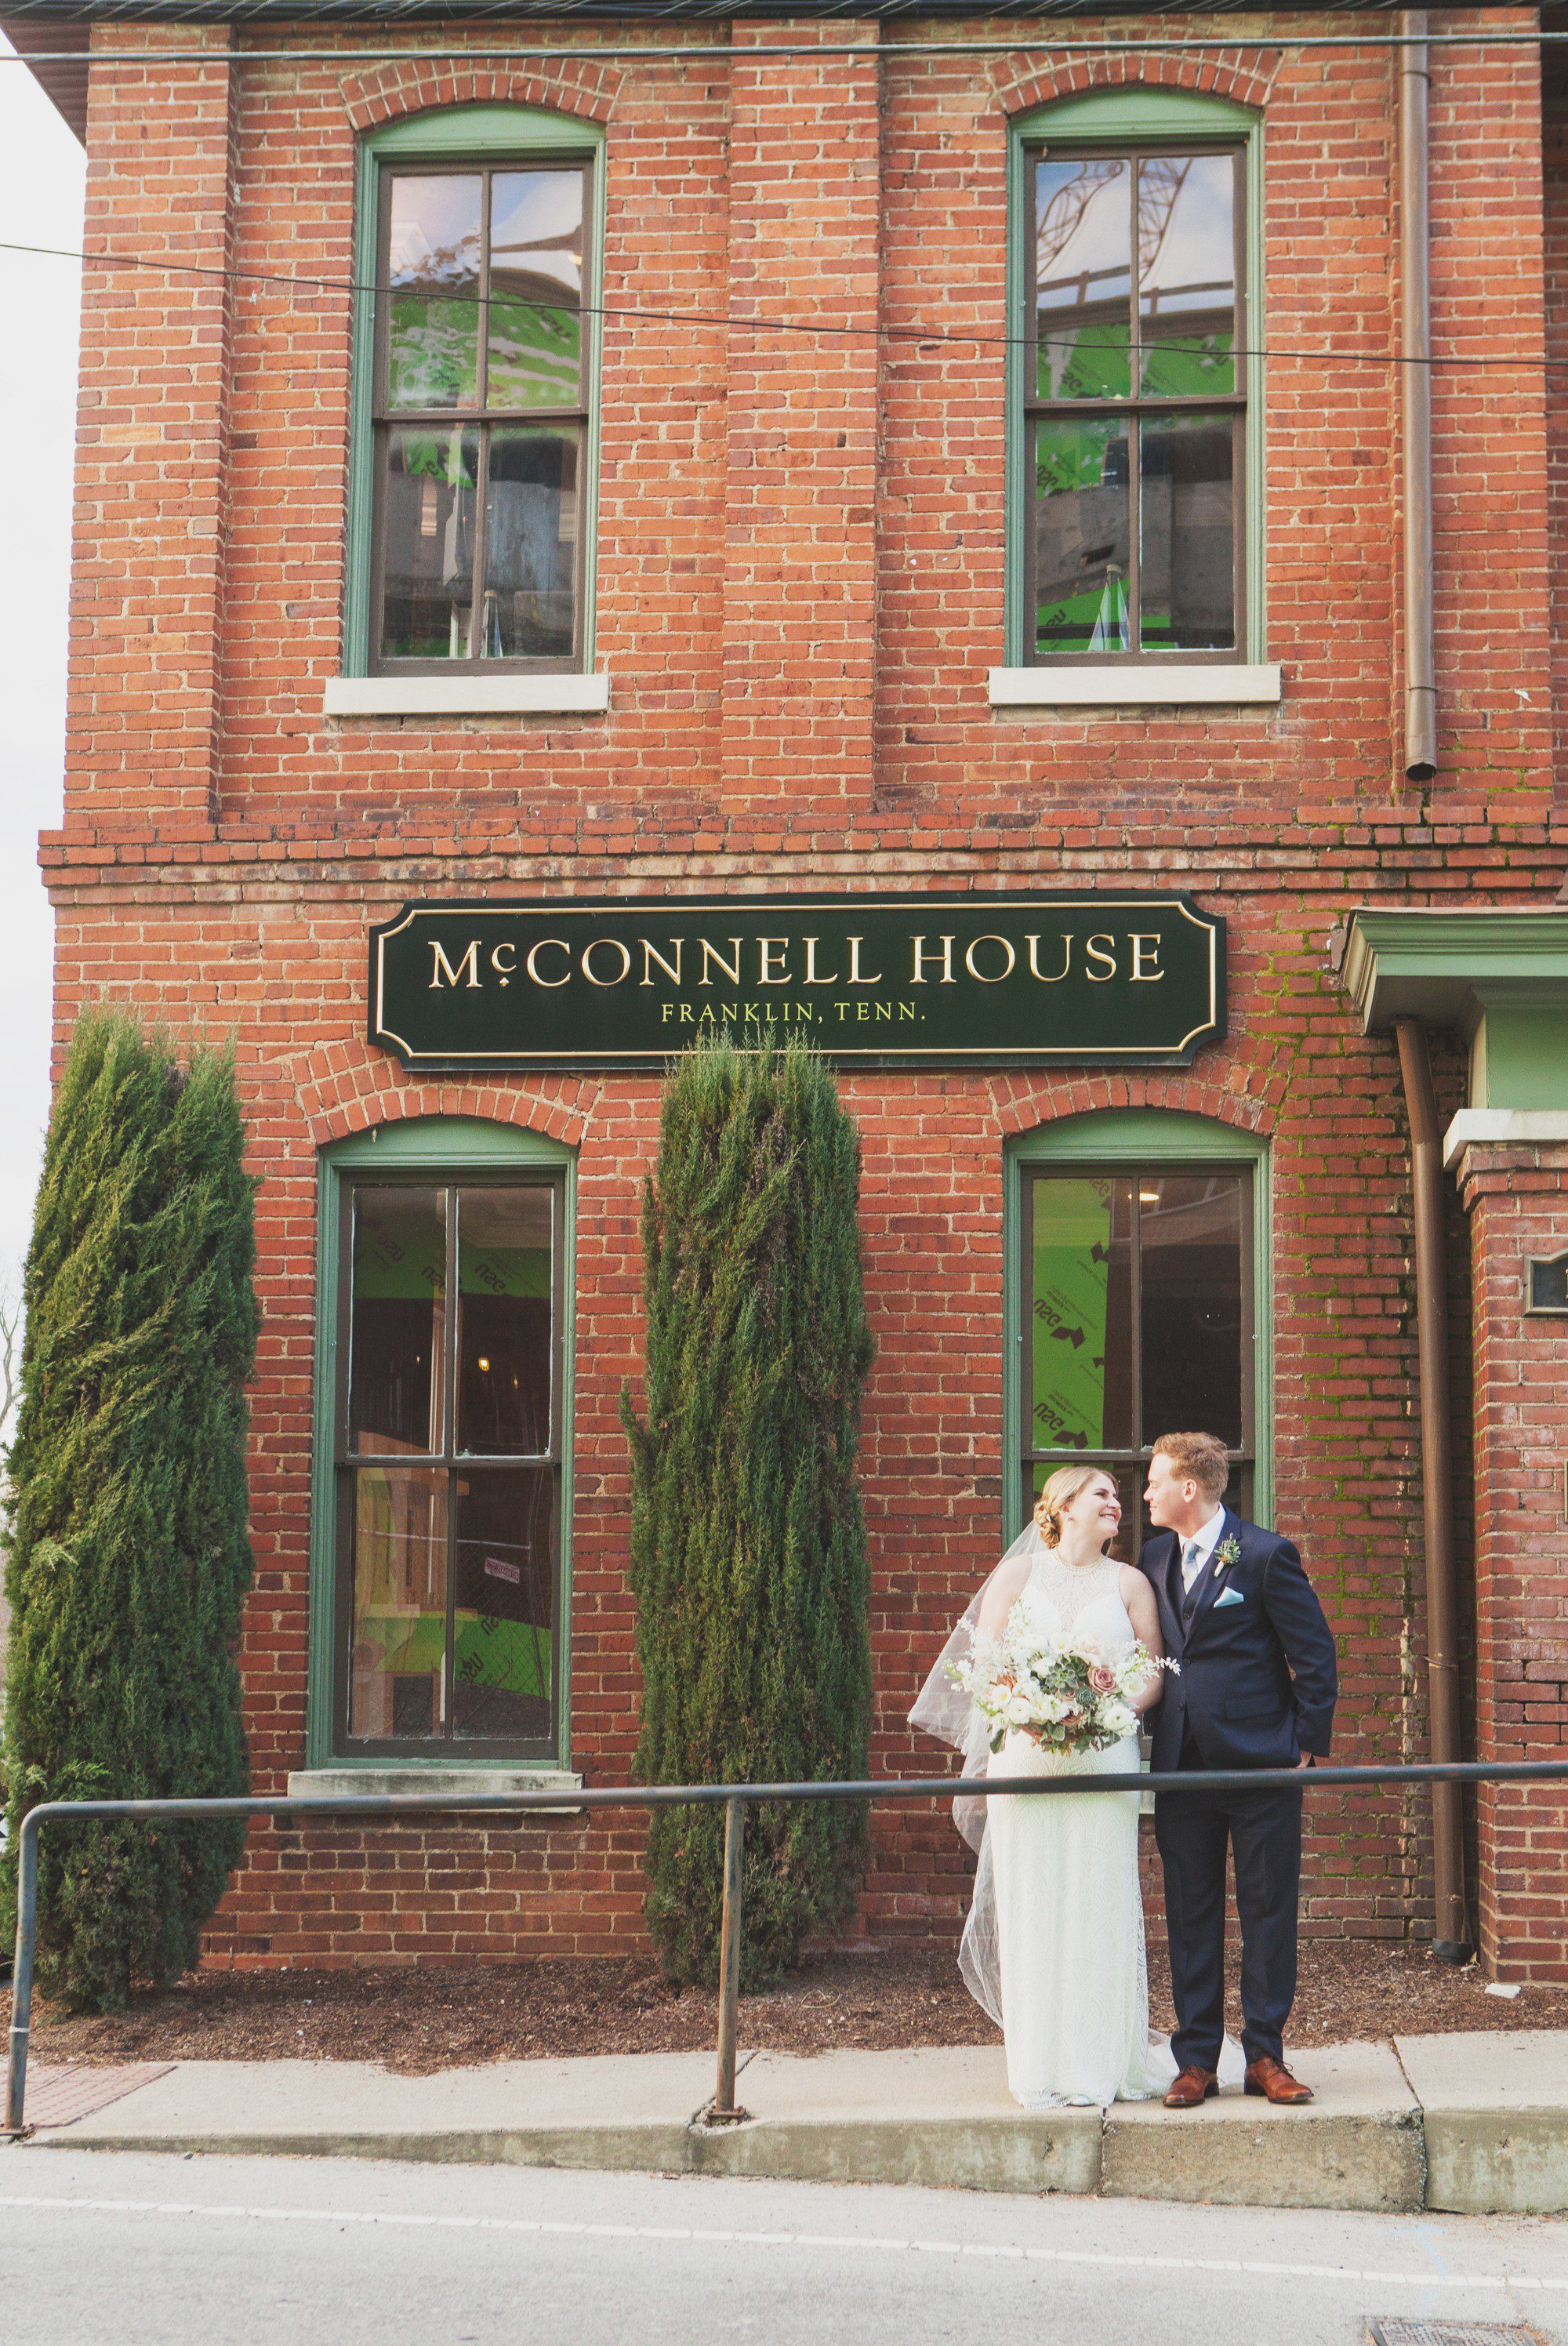 Bride and groom on front porch at McConnell House in Franklin, TN before wedding ceremony. Photos by Krista Lee Photography Nashville, TN